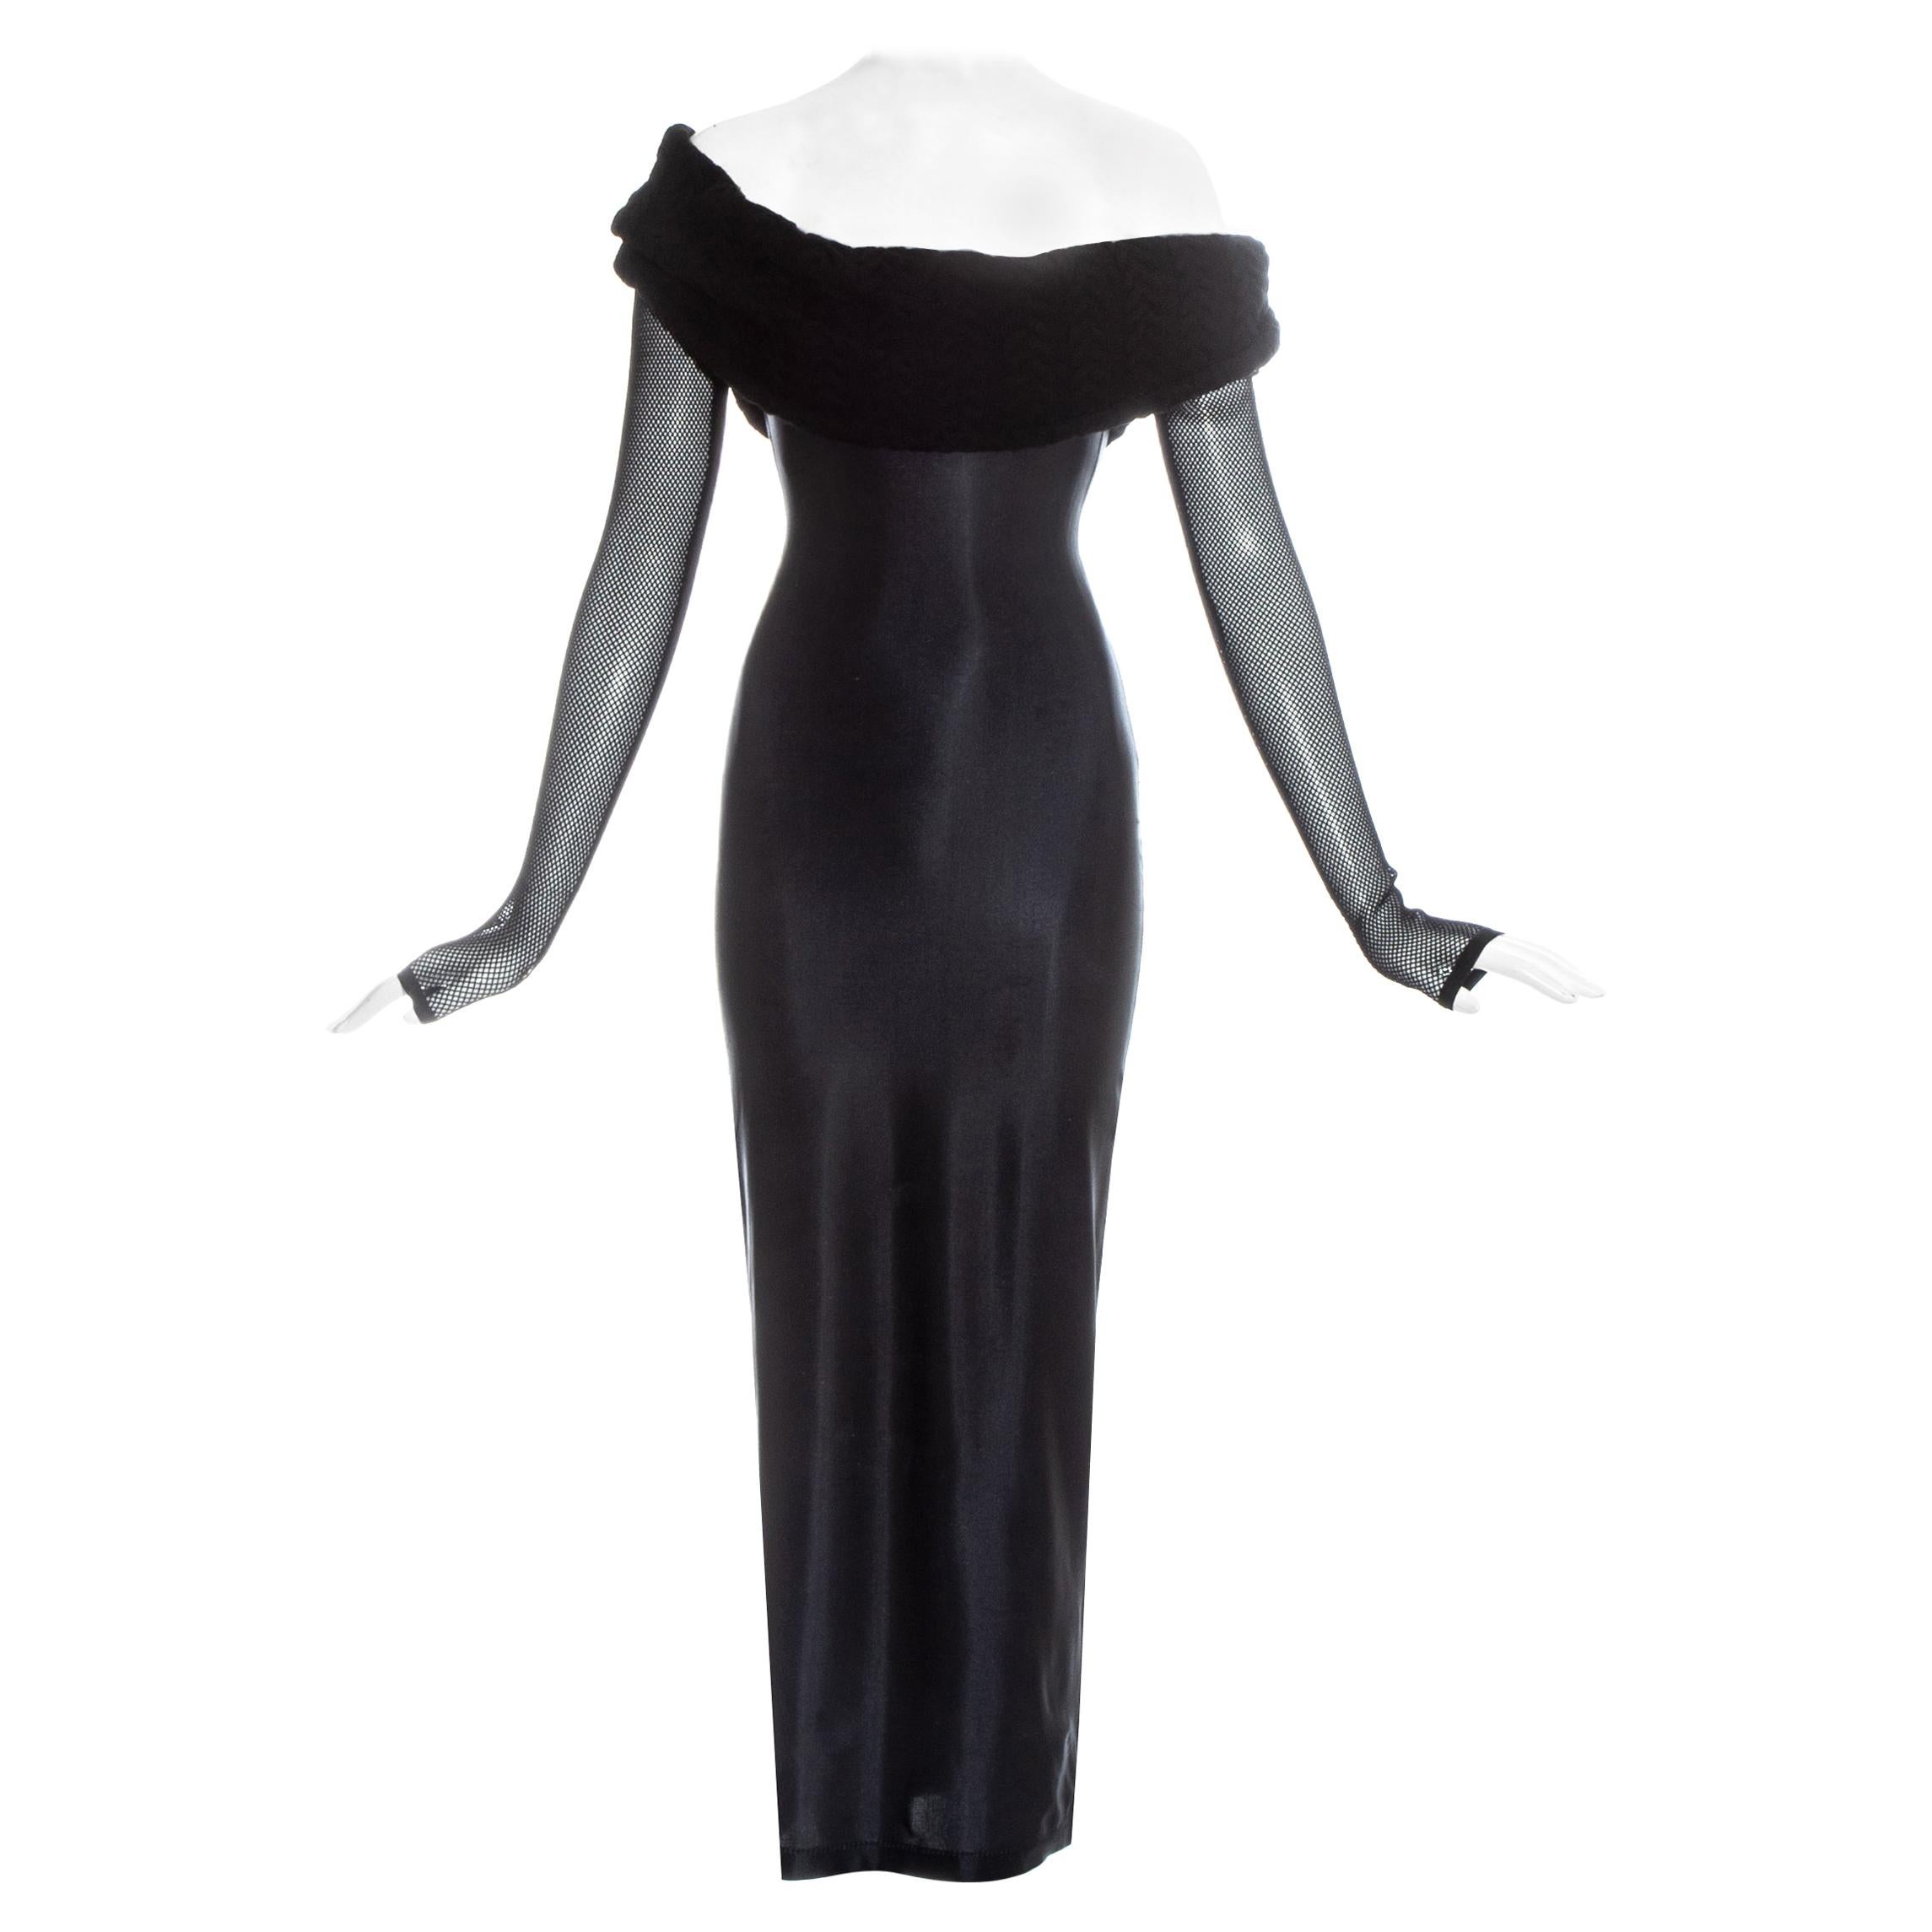 Jean Paul Gaultier Equator black maxi dress with knitted shawl collar, c. 1980s